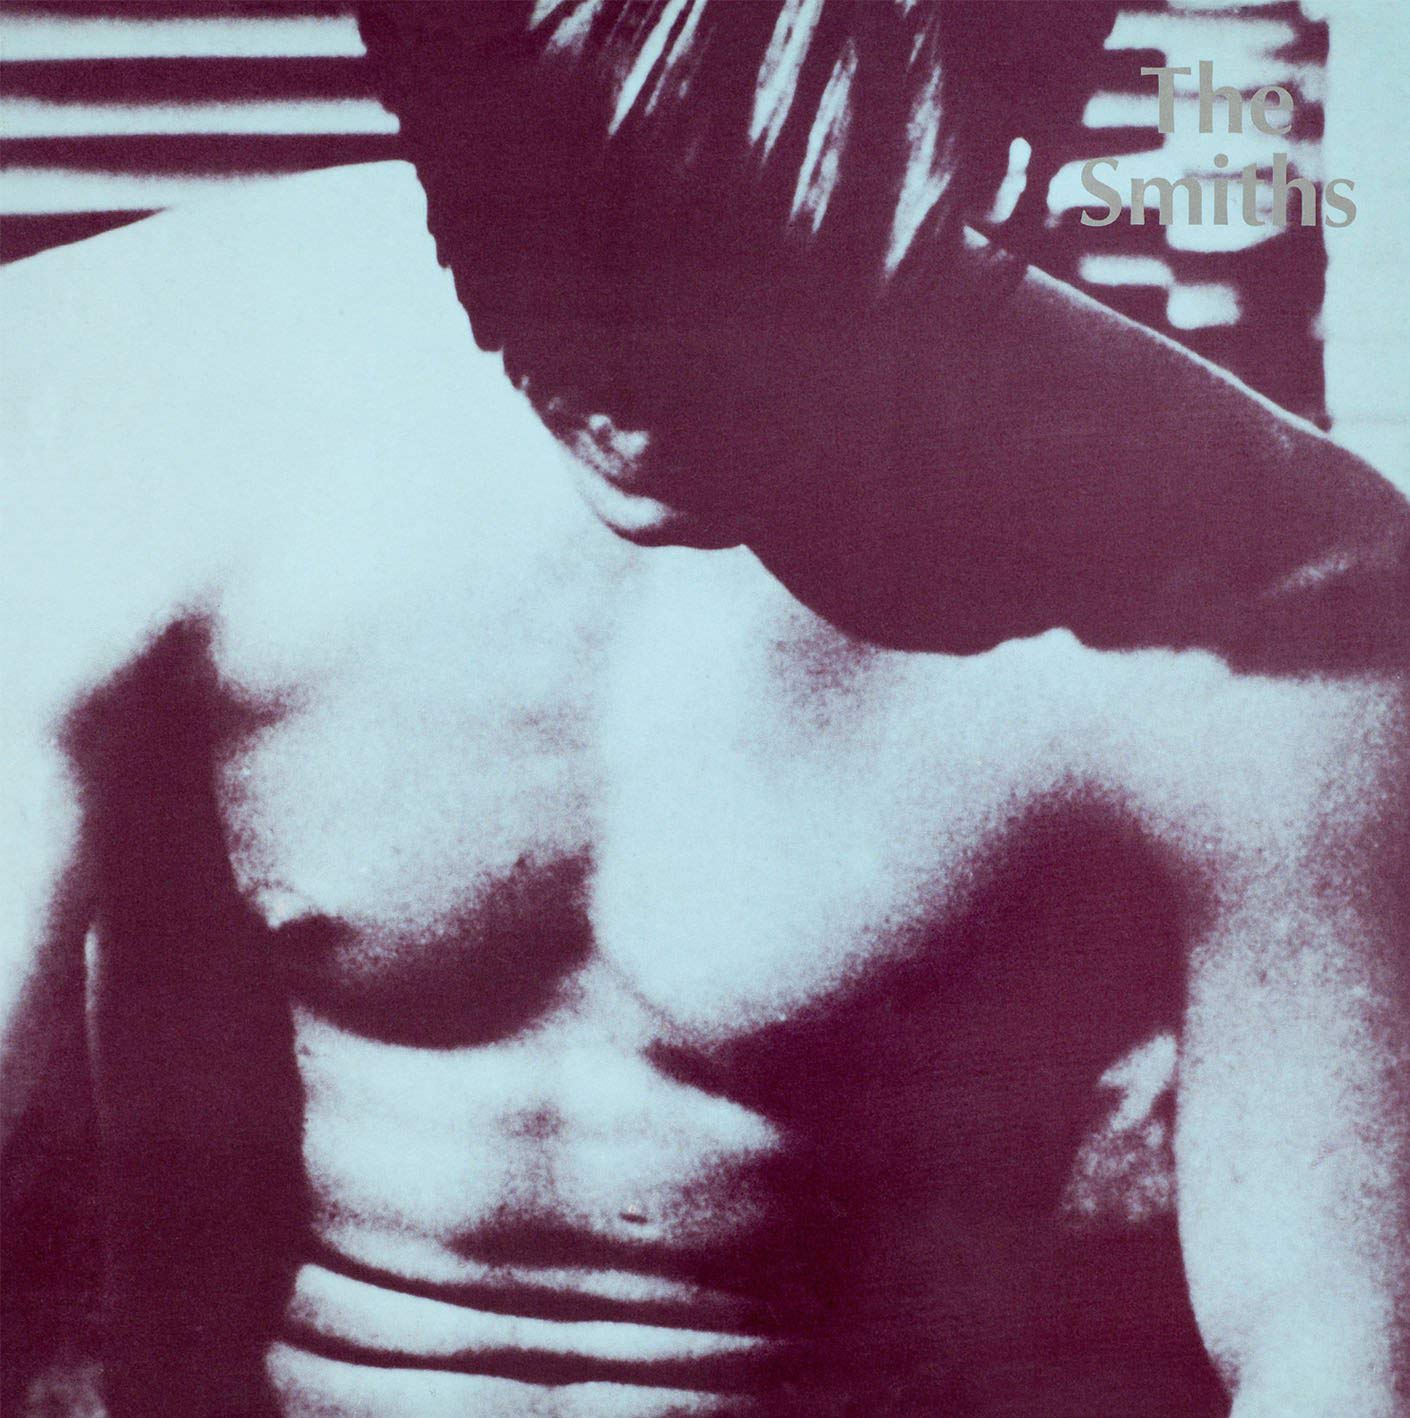 The Smiths - The Smiths LP [Import]